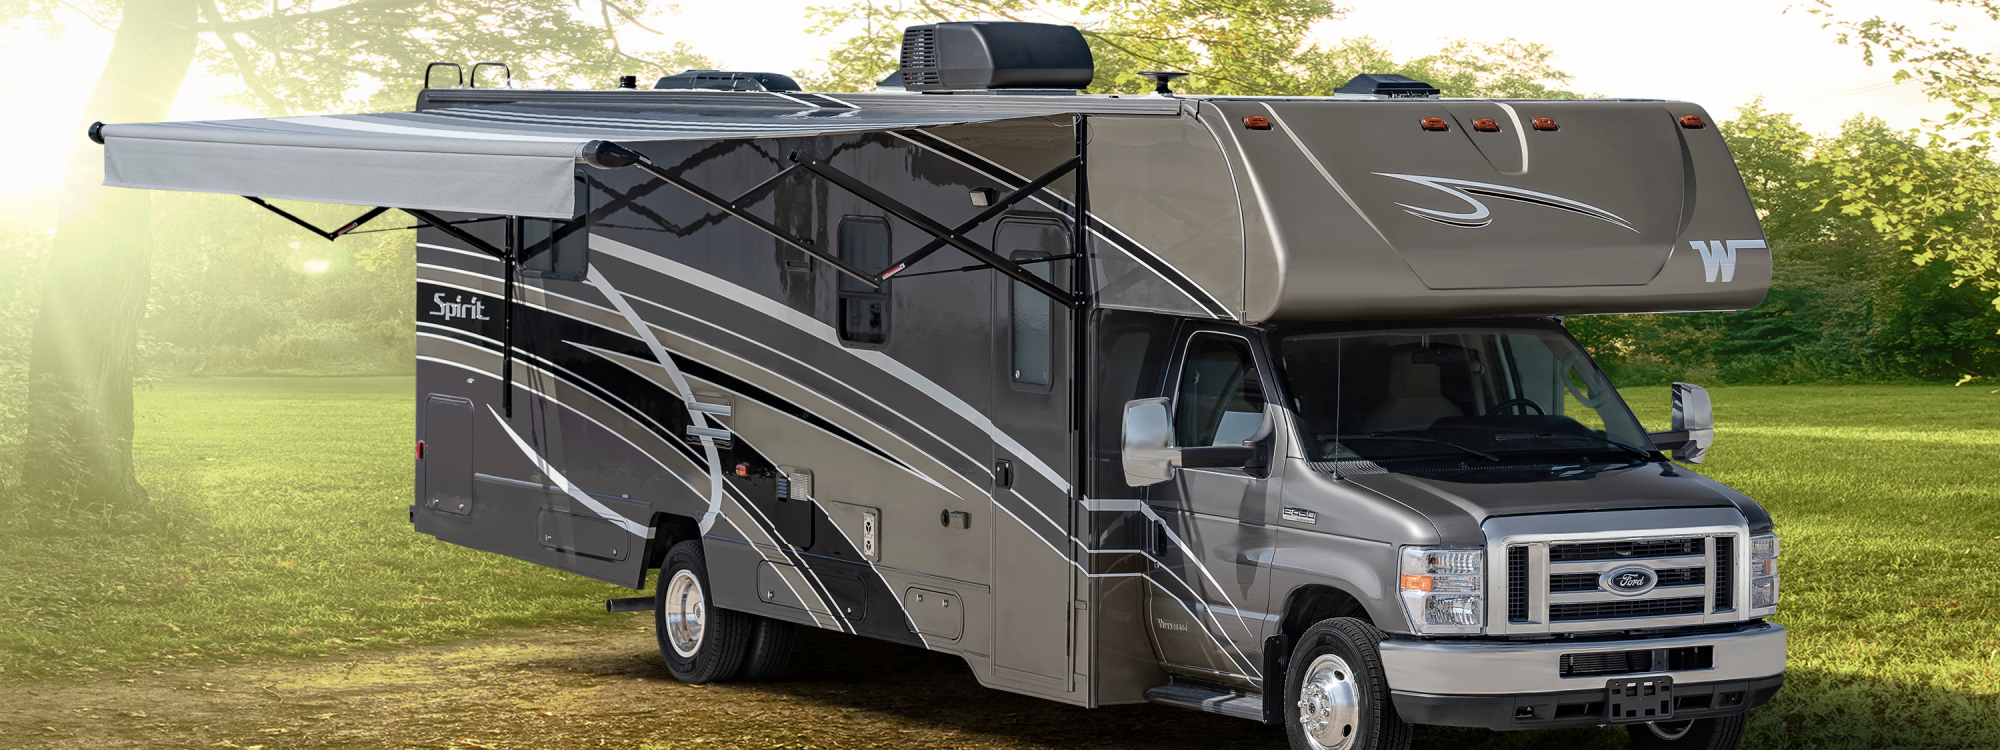 Winnebago Spirit in a sunny field with fully extened awning